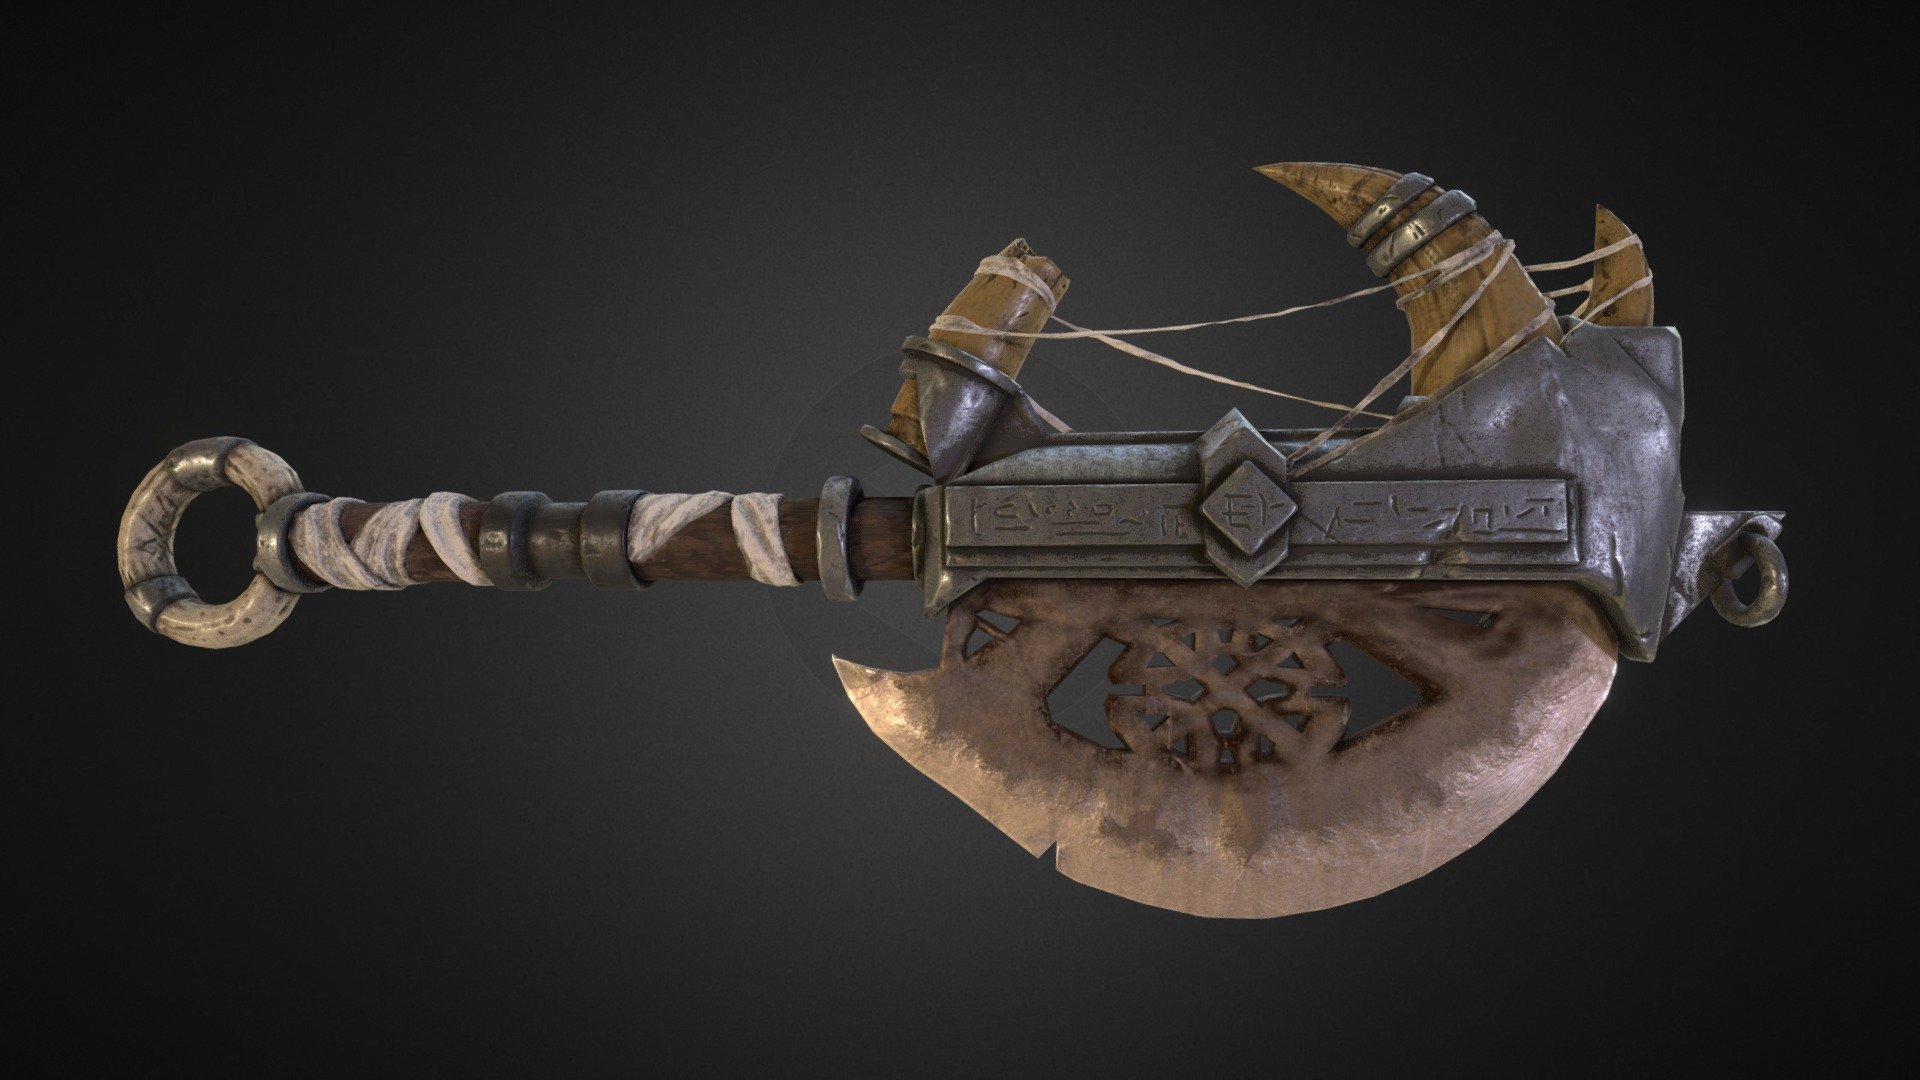 A battle axe created as a material study.

Concept by Litos Lopez (https://www.artstation.com/artwork/QWynL)

PBR Textures composed of 2 sets of 2048x2048 px.

Made in 26 hours using 3ds Max, Zbrush and Substance Painter.

Iray renders and sculpt here : https://www.artstation.com/artwork/rYV9a - Battle Axe - 3D model by Edgeandvertex 3d model